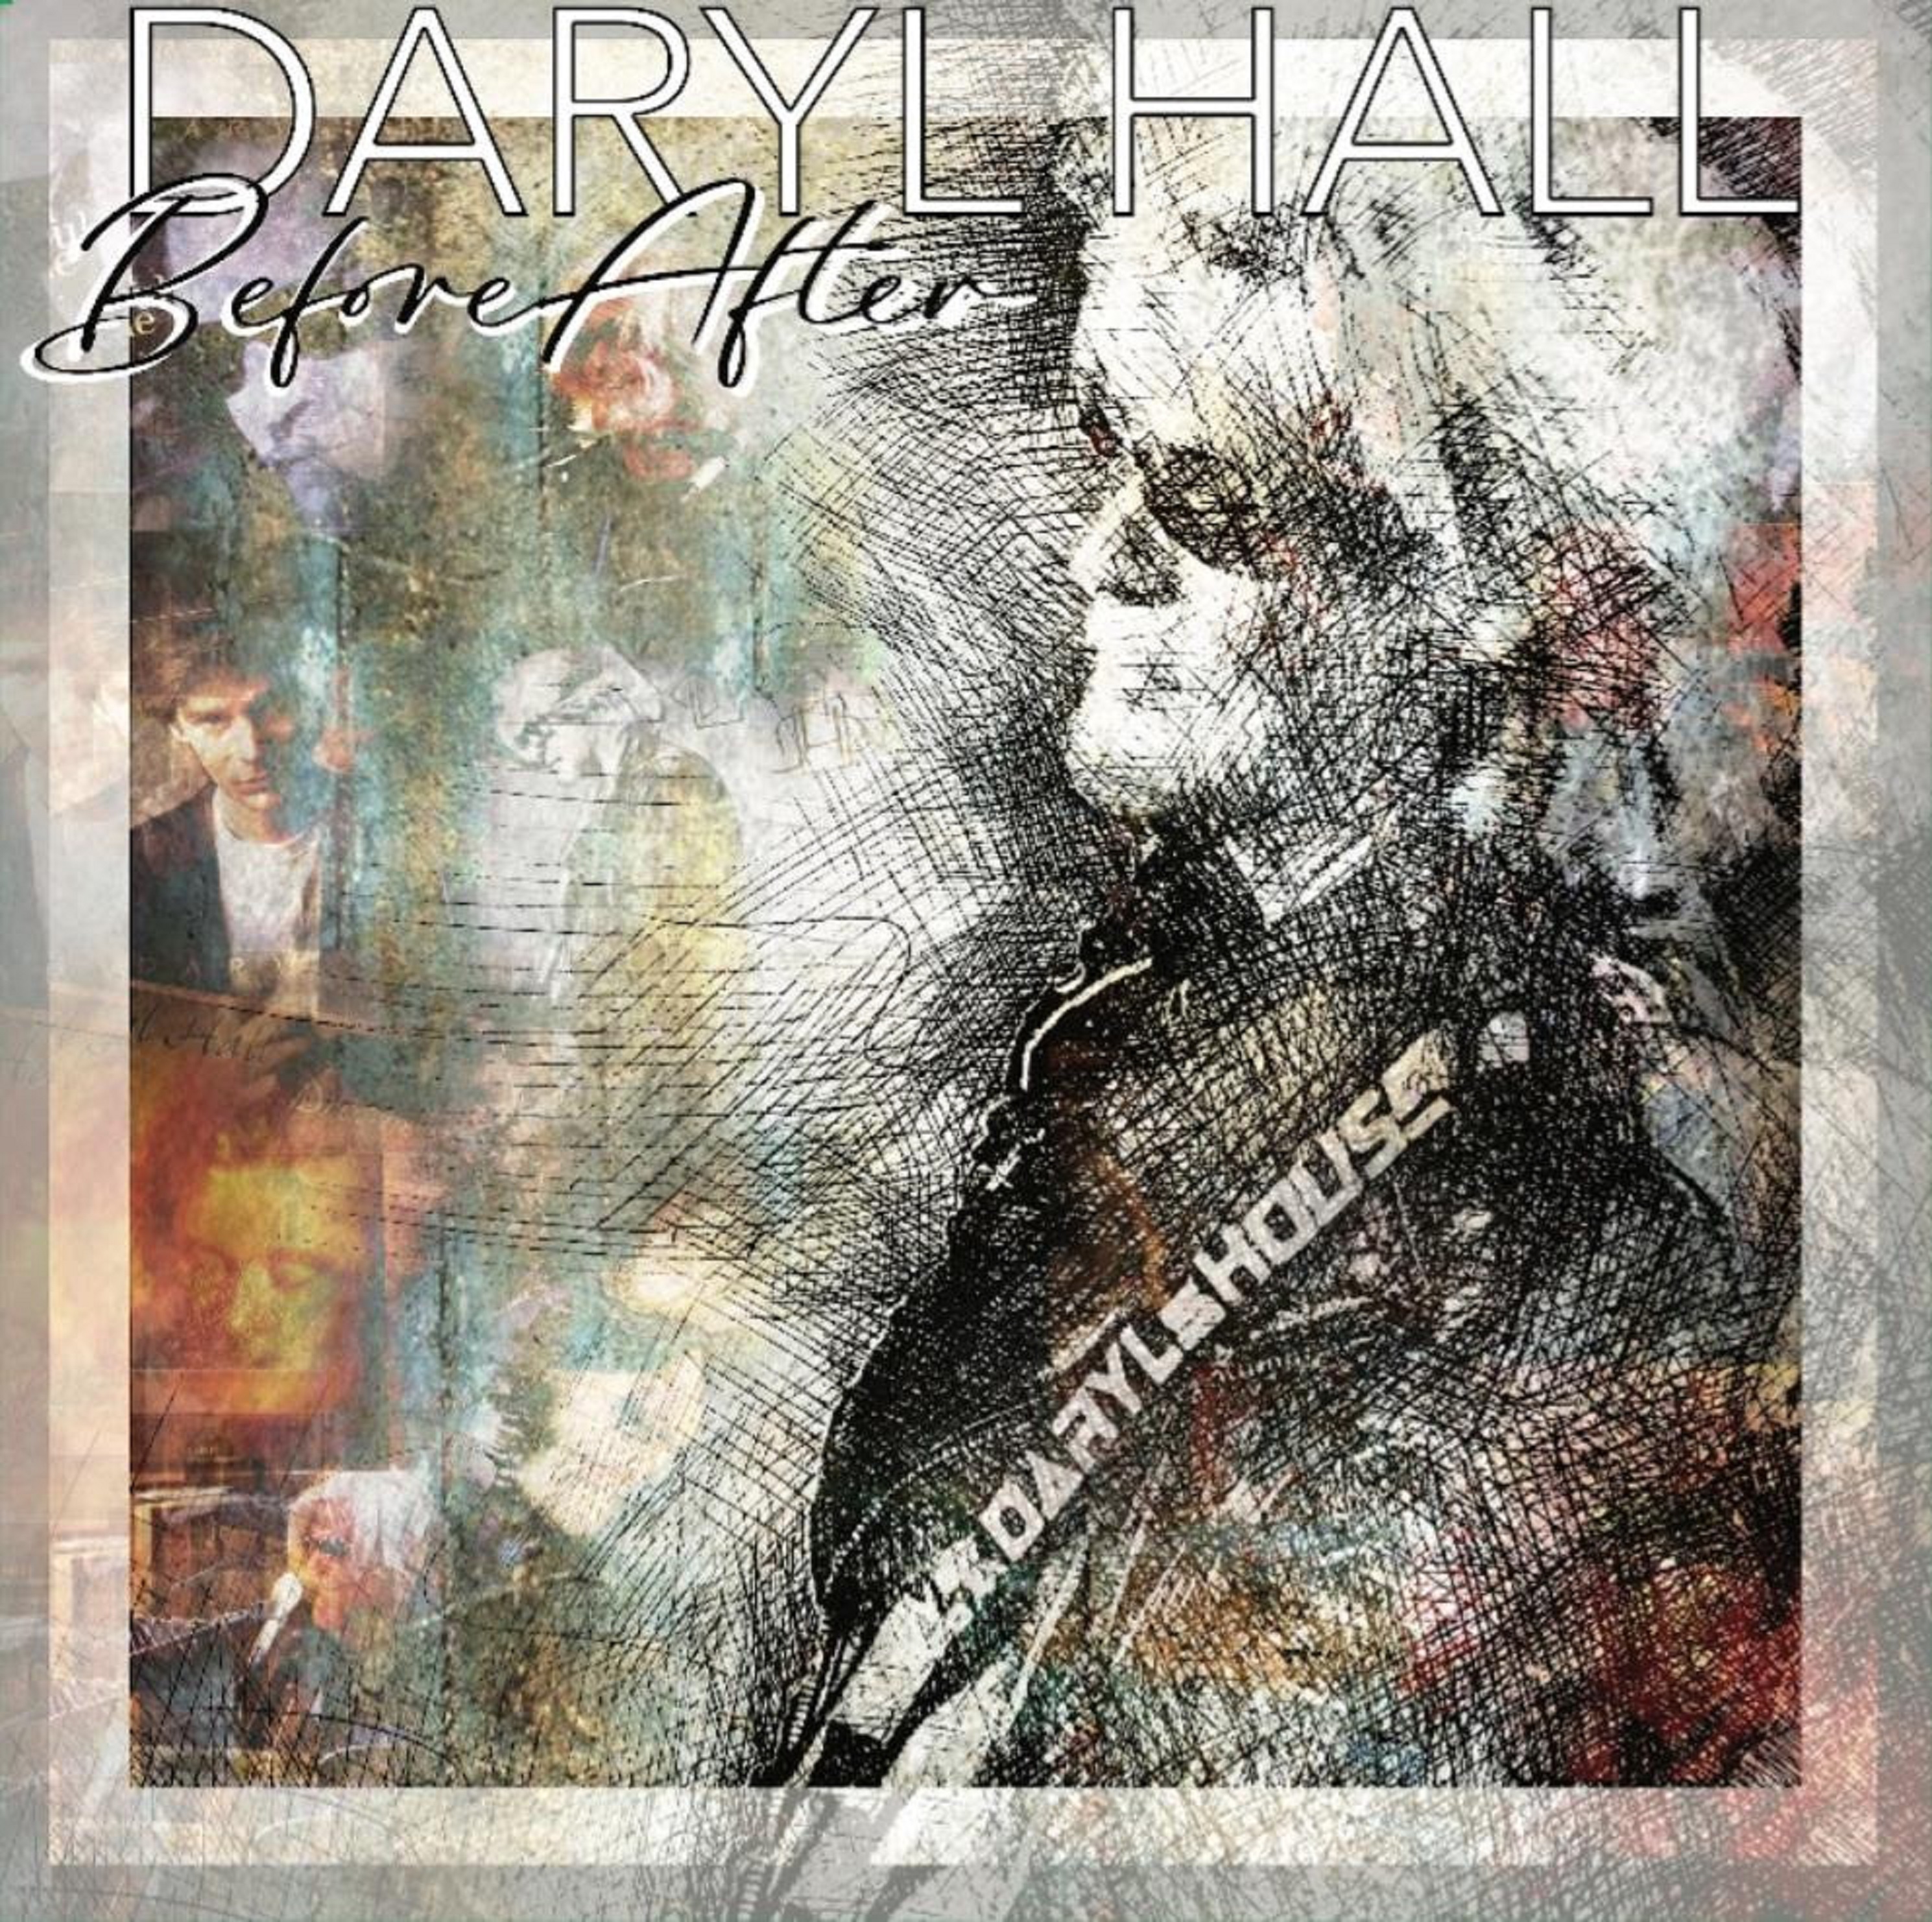 Daryl Hall to release first-ever solo retrospective BeforeAfter (Legacy Records) on April 1st